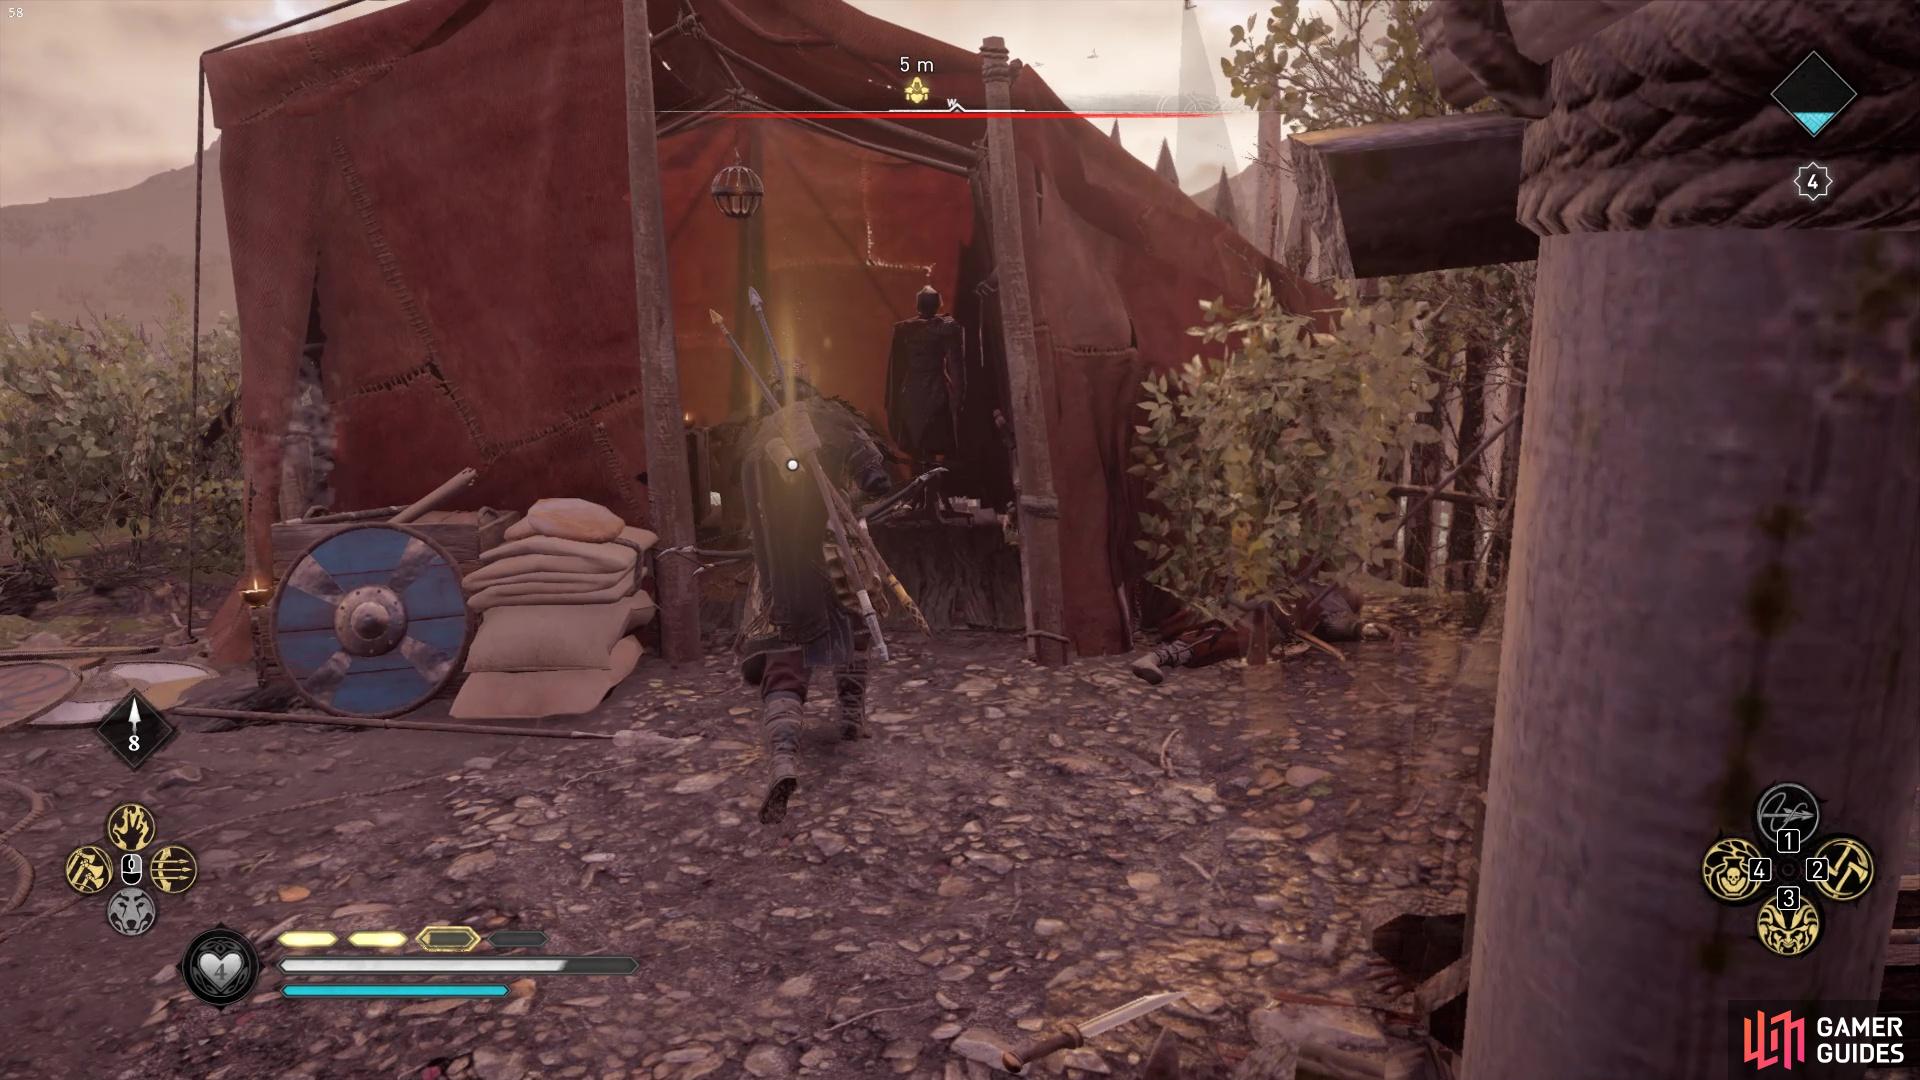 youll find a chest in one of the red tents in the enemy camp.